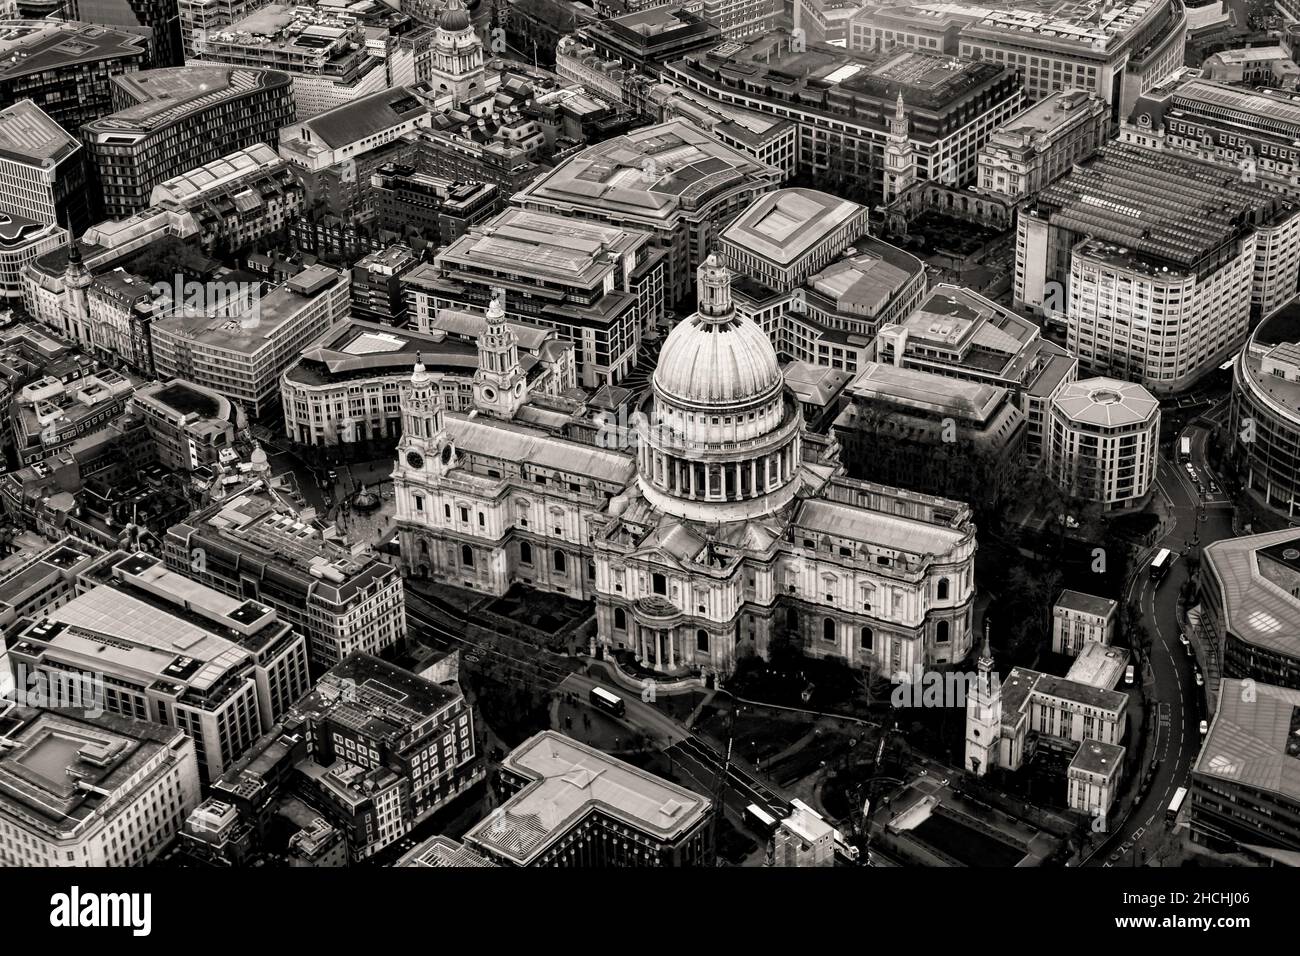 St. Paul's Cathedral from a Helicopter Stock Photo